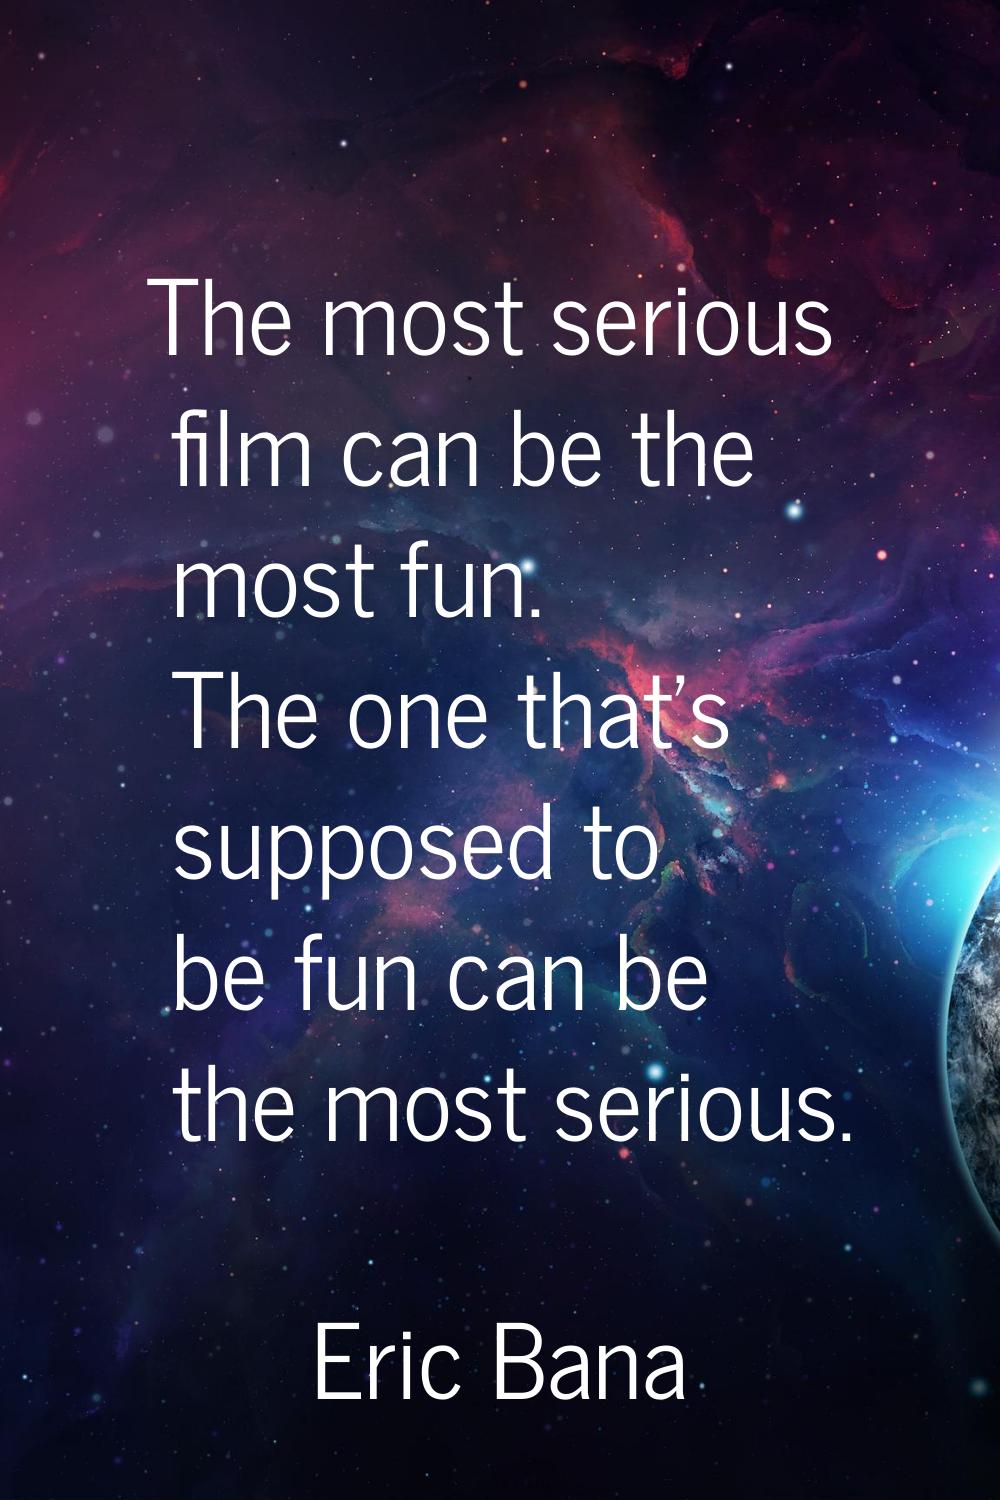 The most serious film can be the most fun. The one that's supposed to be fun can be the most seriou